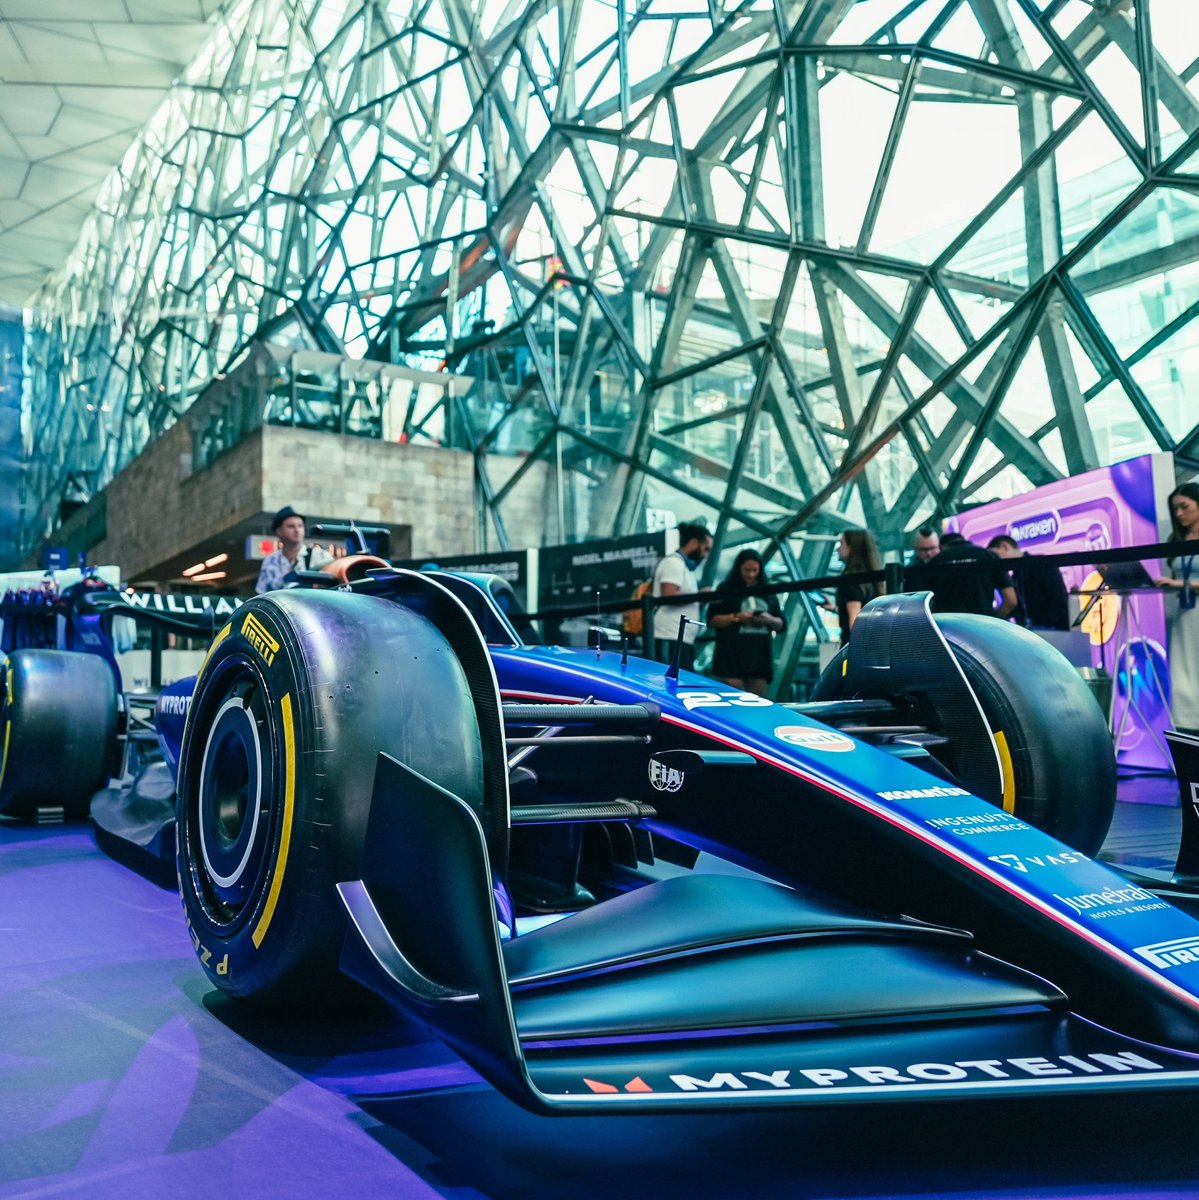 Fan Zone 1/9 ✅ Our F1 simulators made their first trip of the year across the world last weekend! Thank you, Melbourne! 🇦🇺 💙 See you soon, Tokyo! 🇯🇵 #WilliamsEsports #WeAreWilliams #SimRacing #F1 #Formula1